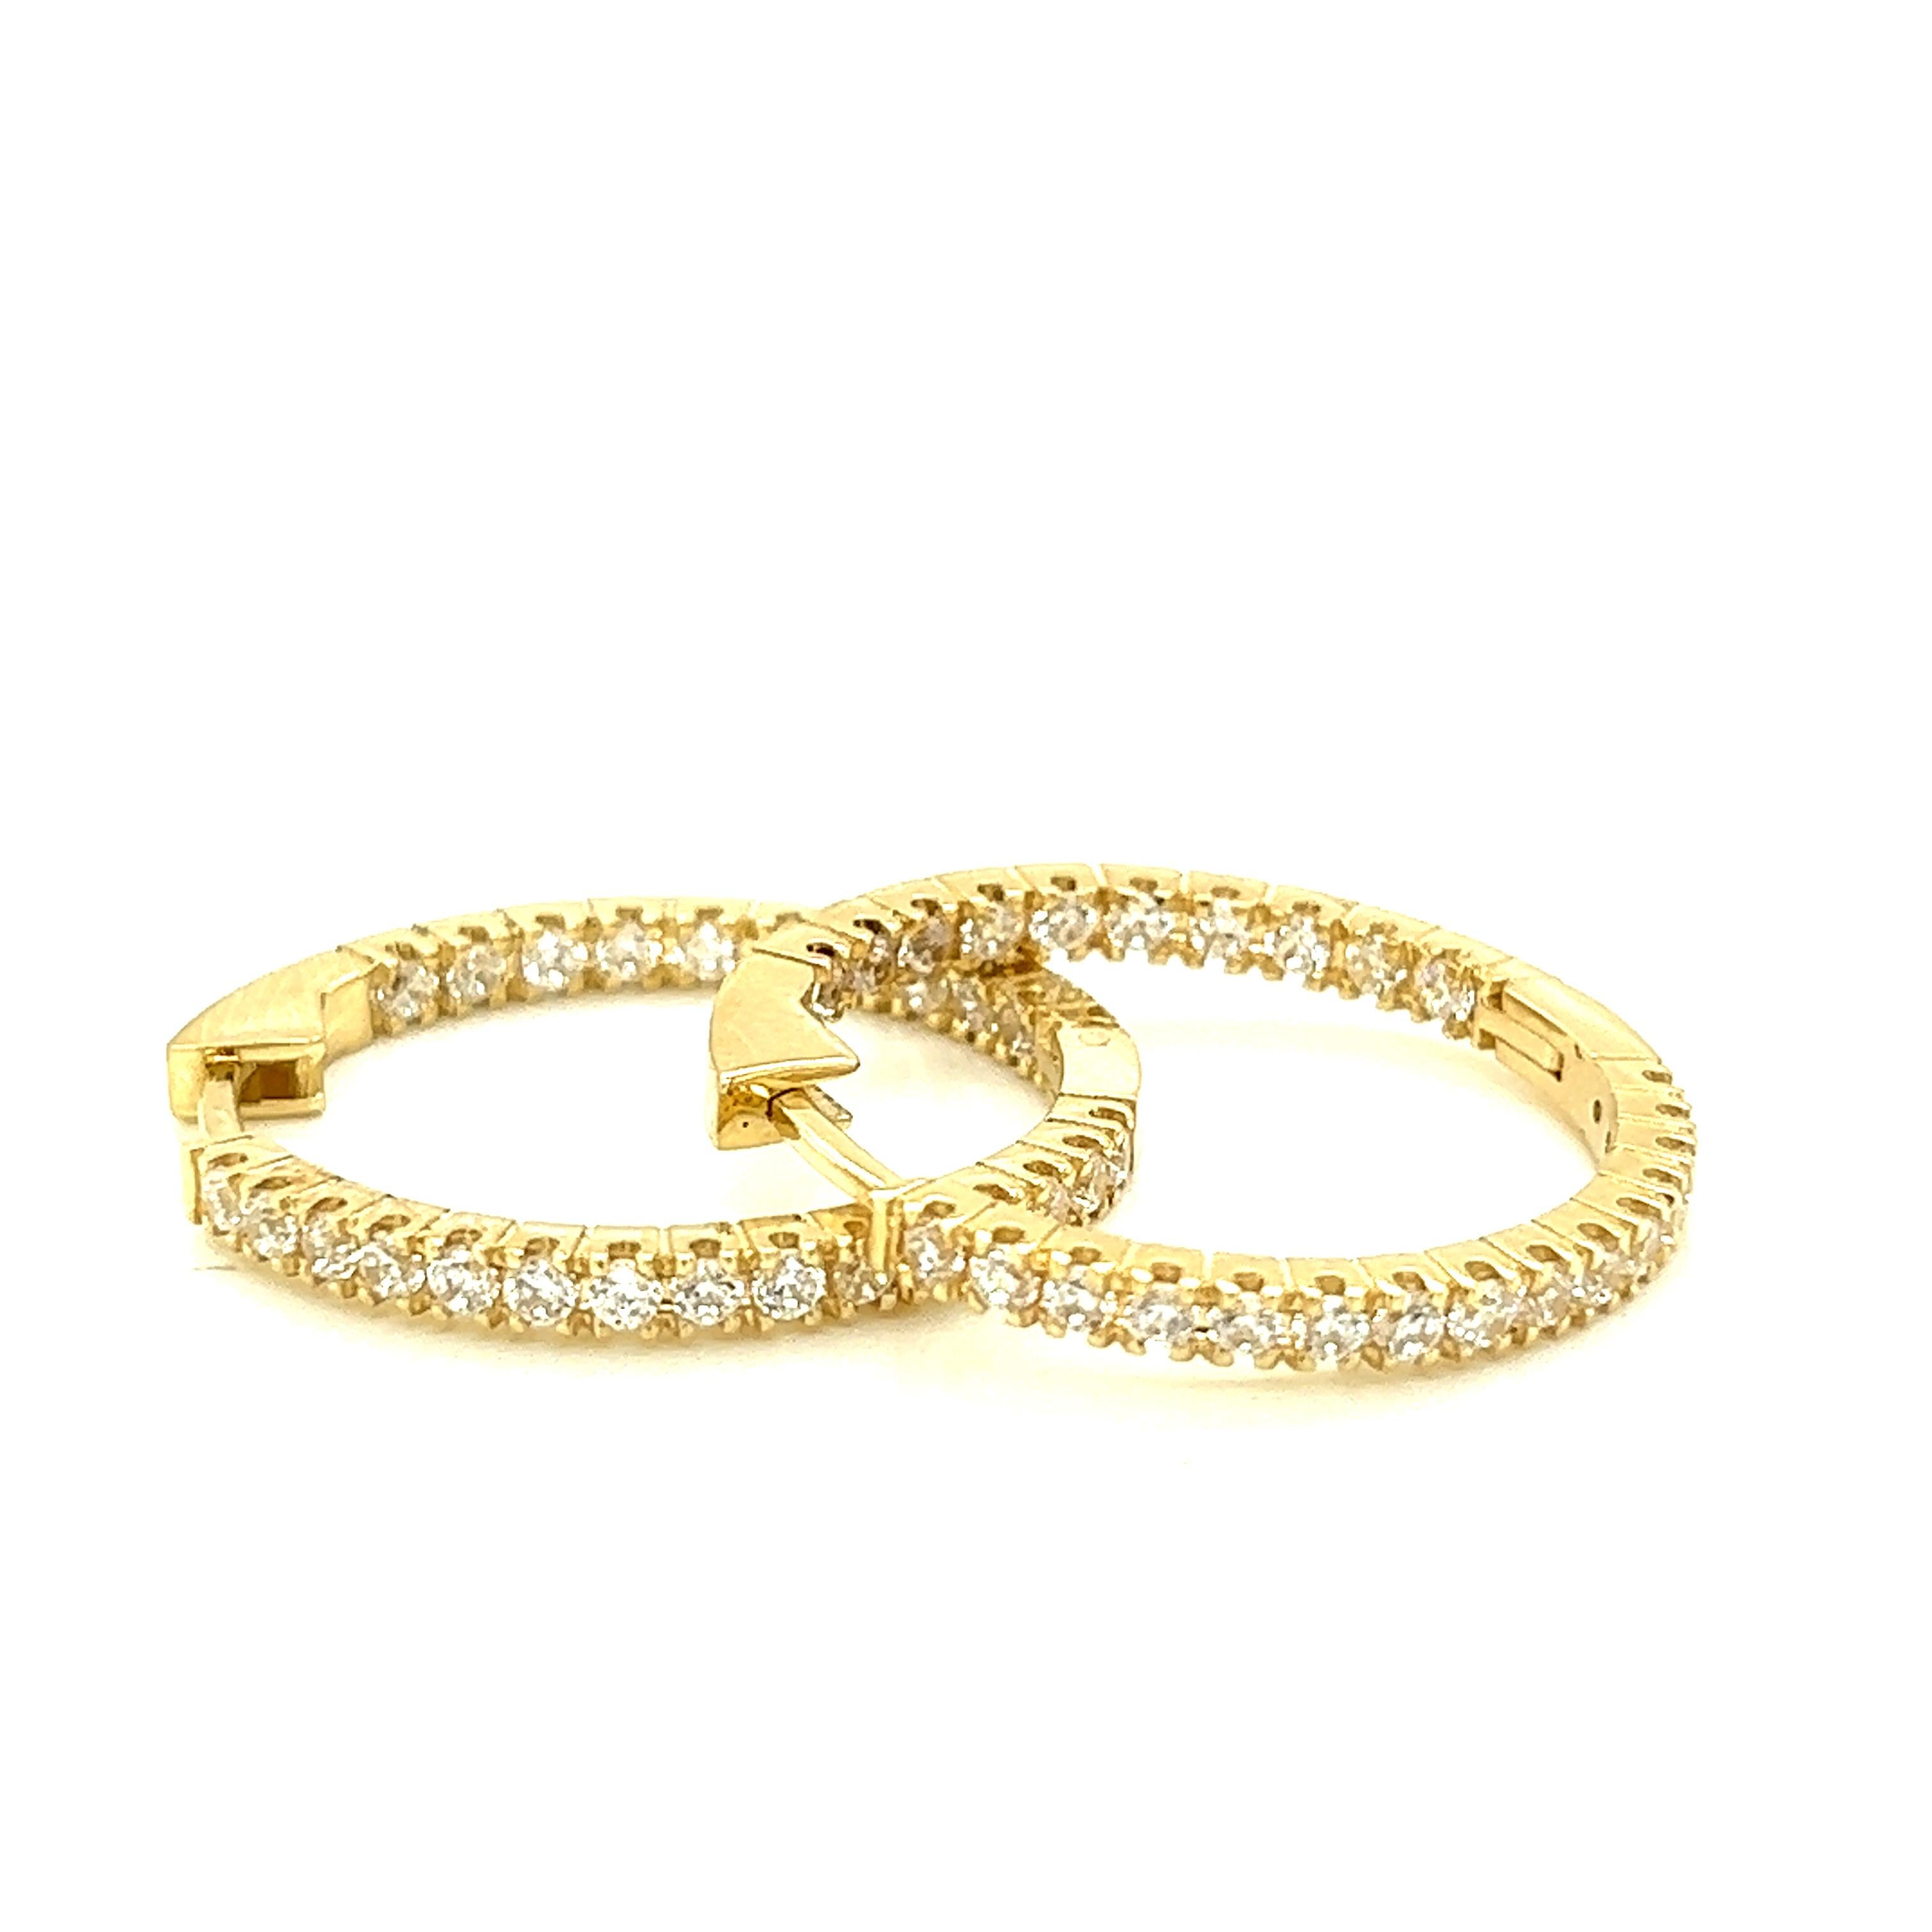 14 Karat Yellow Gold Hand-Crafted Polish-Finished 25mm Inside-Out Eternity Diamond Hoop Earrings, Set with 1.25 Carats Diamonds and a Hinge-Post Closure.
